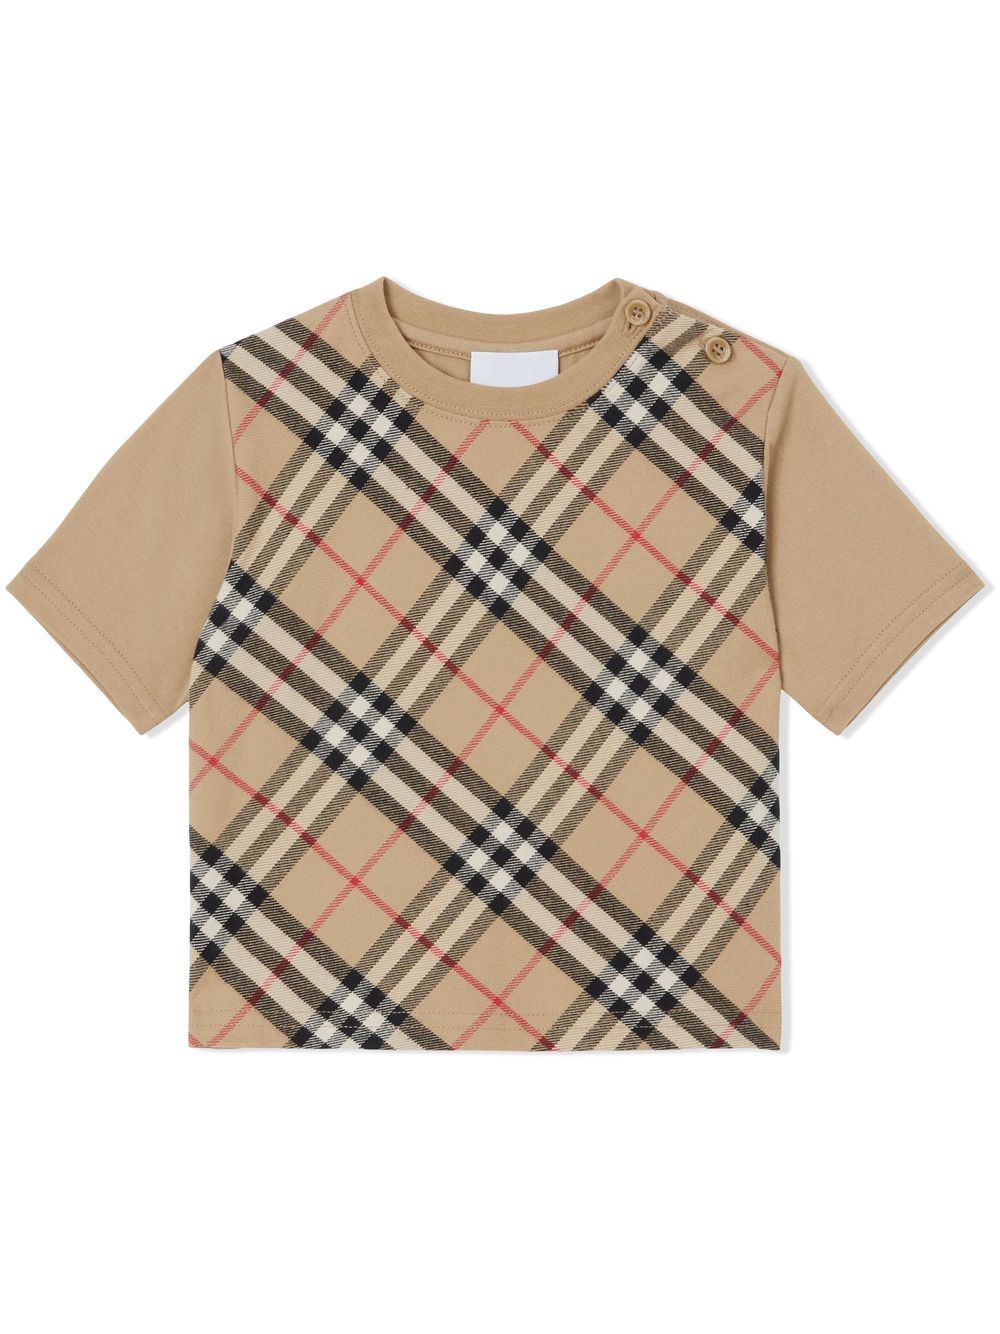 BURBERRY VINTAGE CHECK PANELLED T-SHIRT